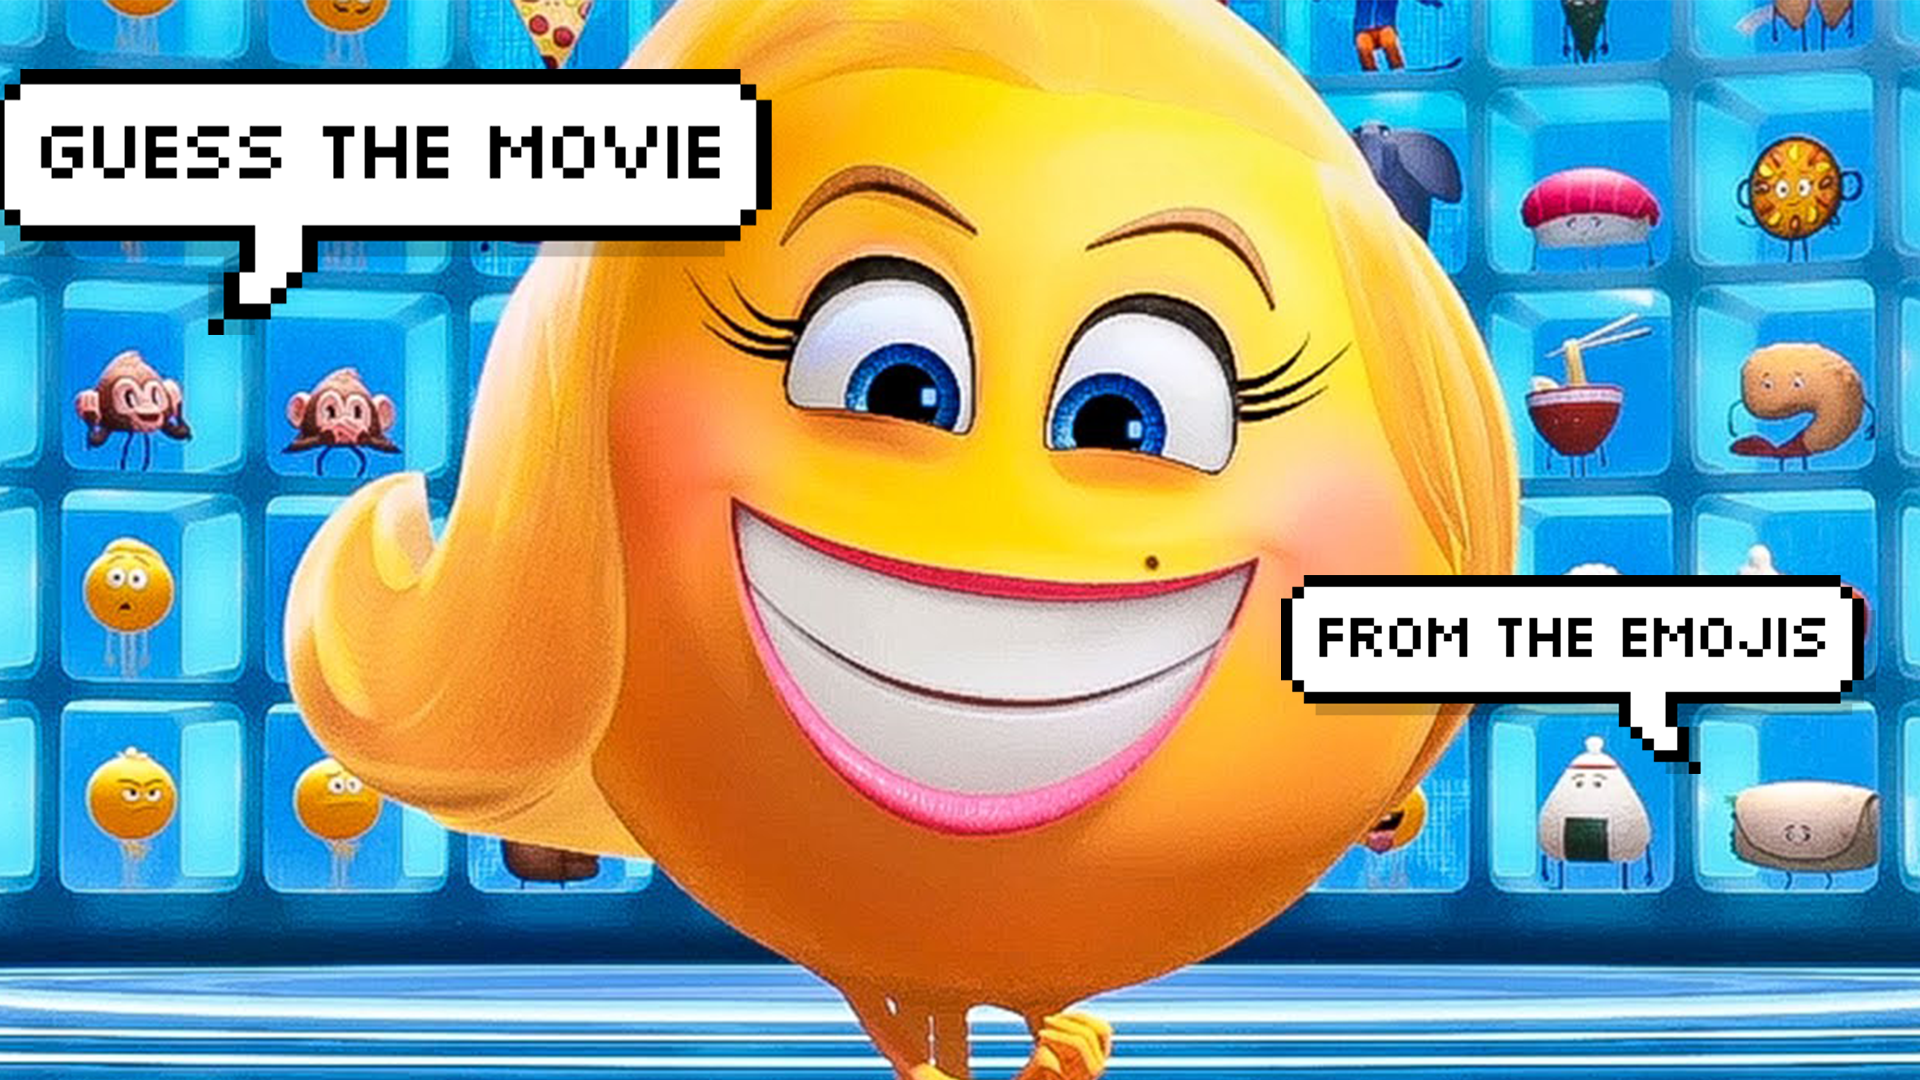 Can You Identify The Movie From The Emojis?